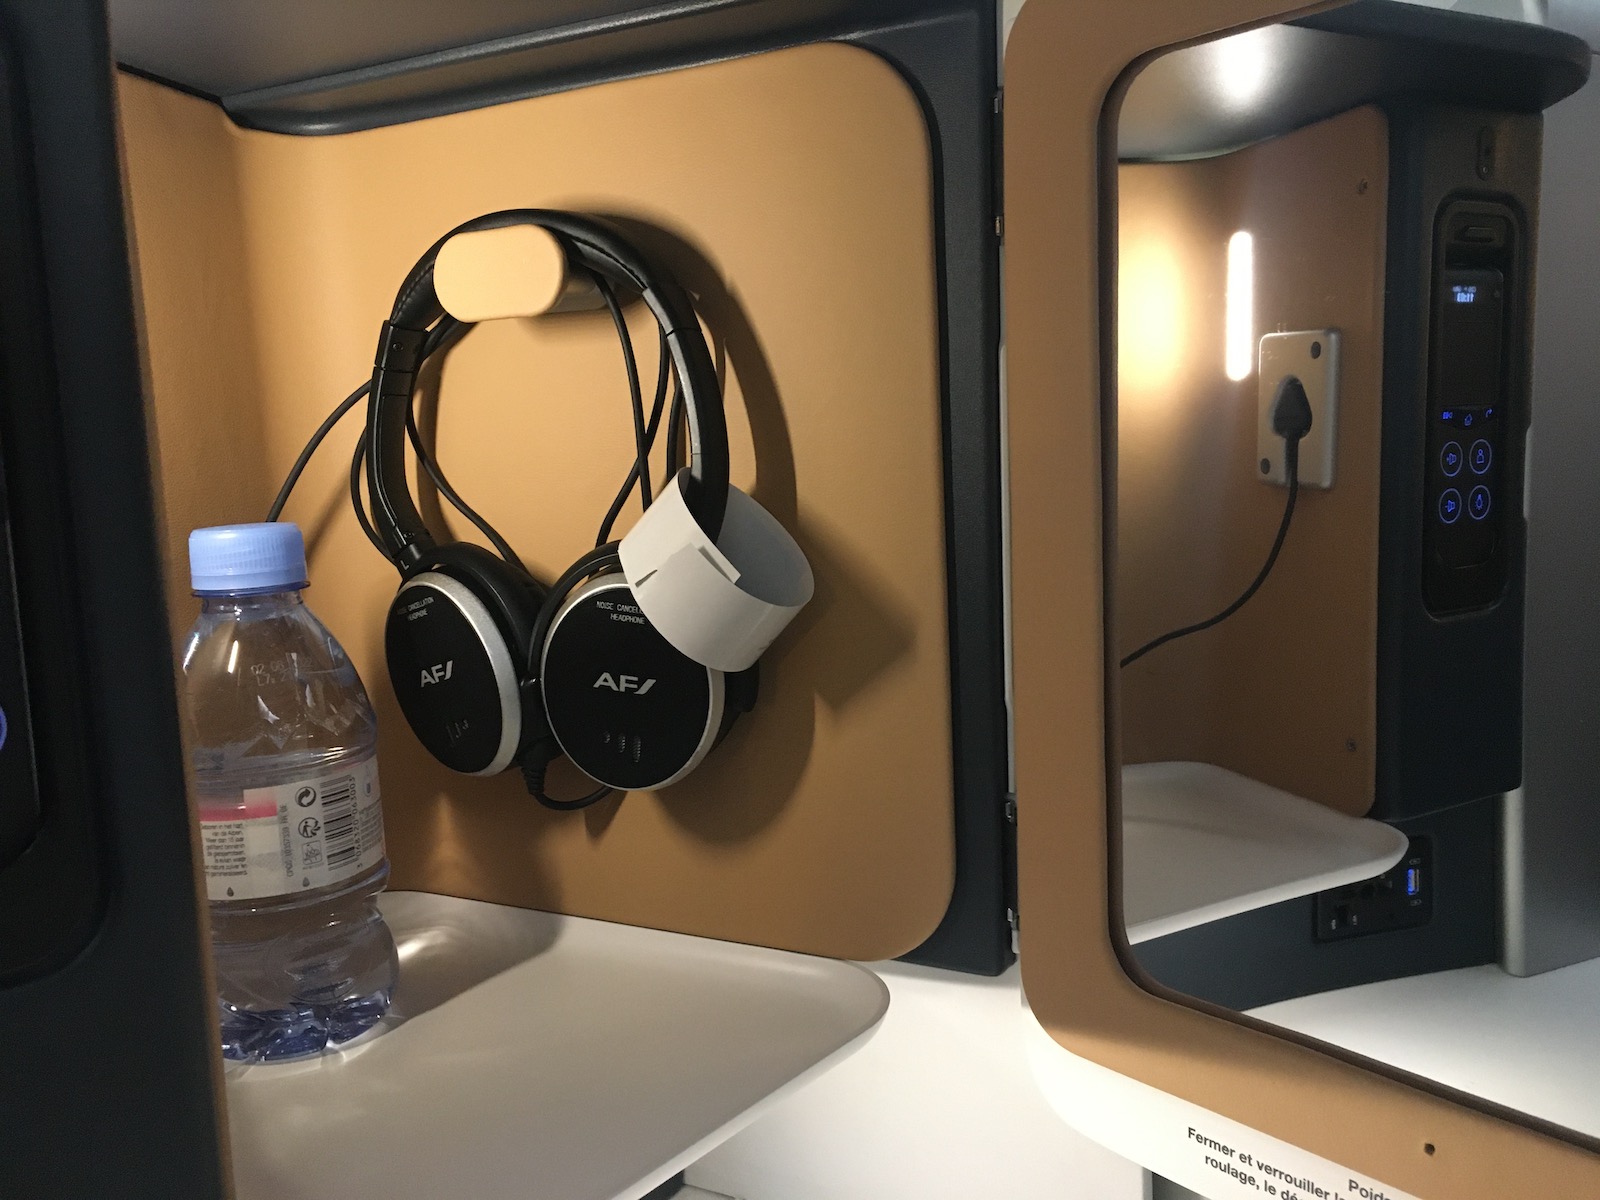 Air France business class personal cubby